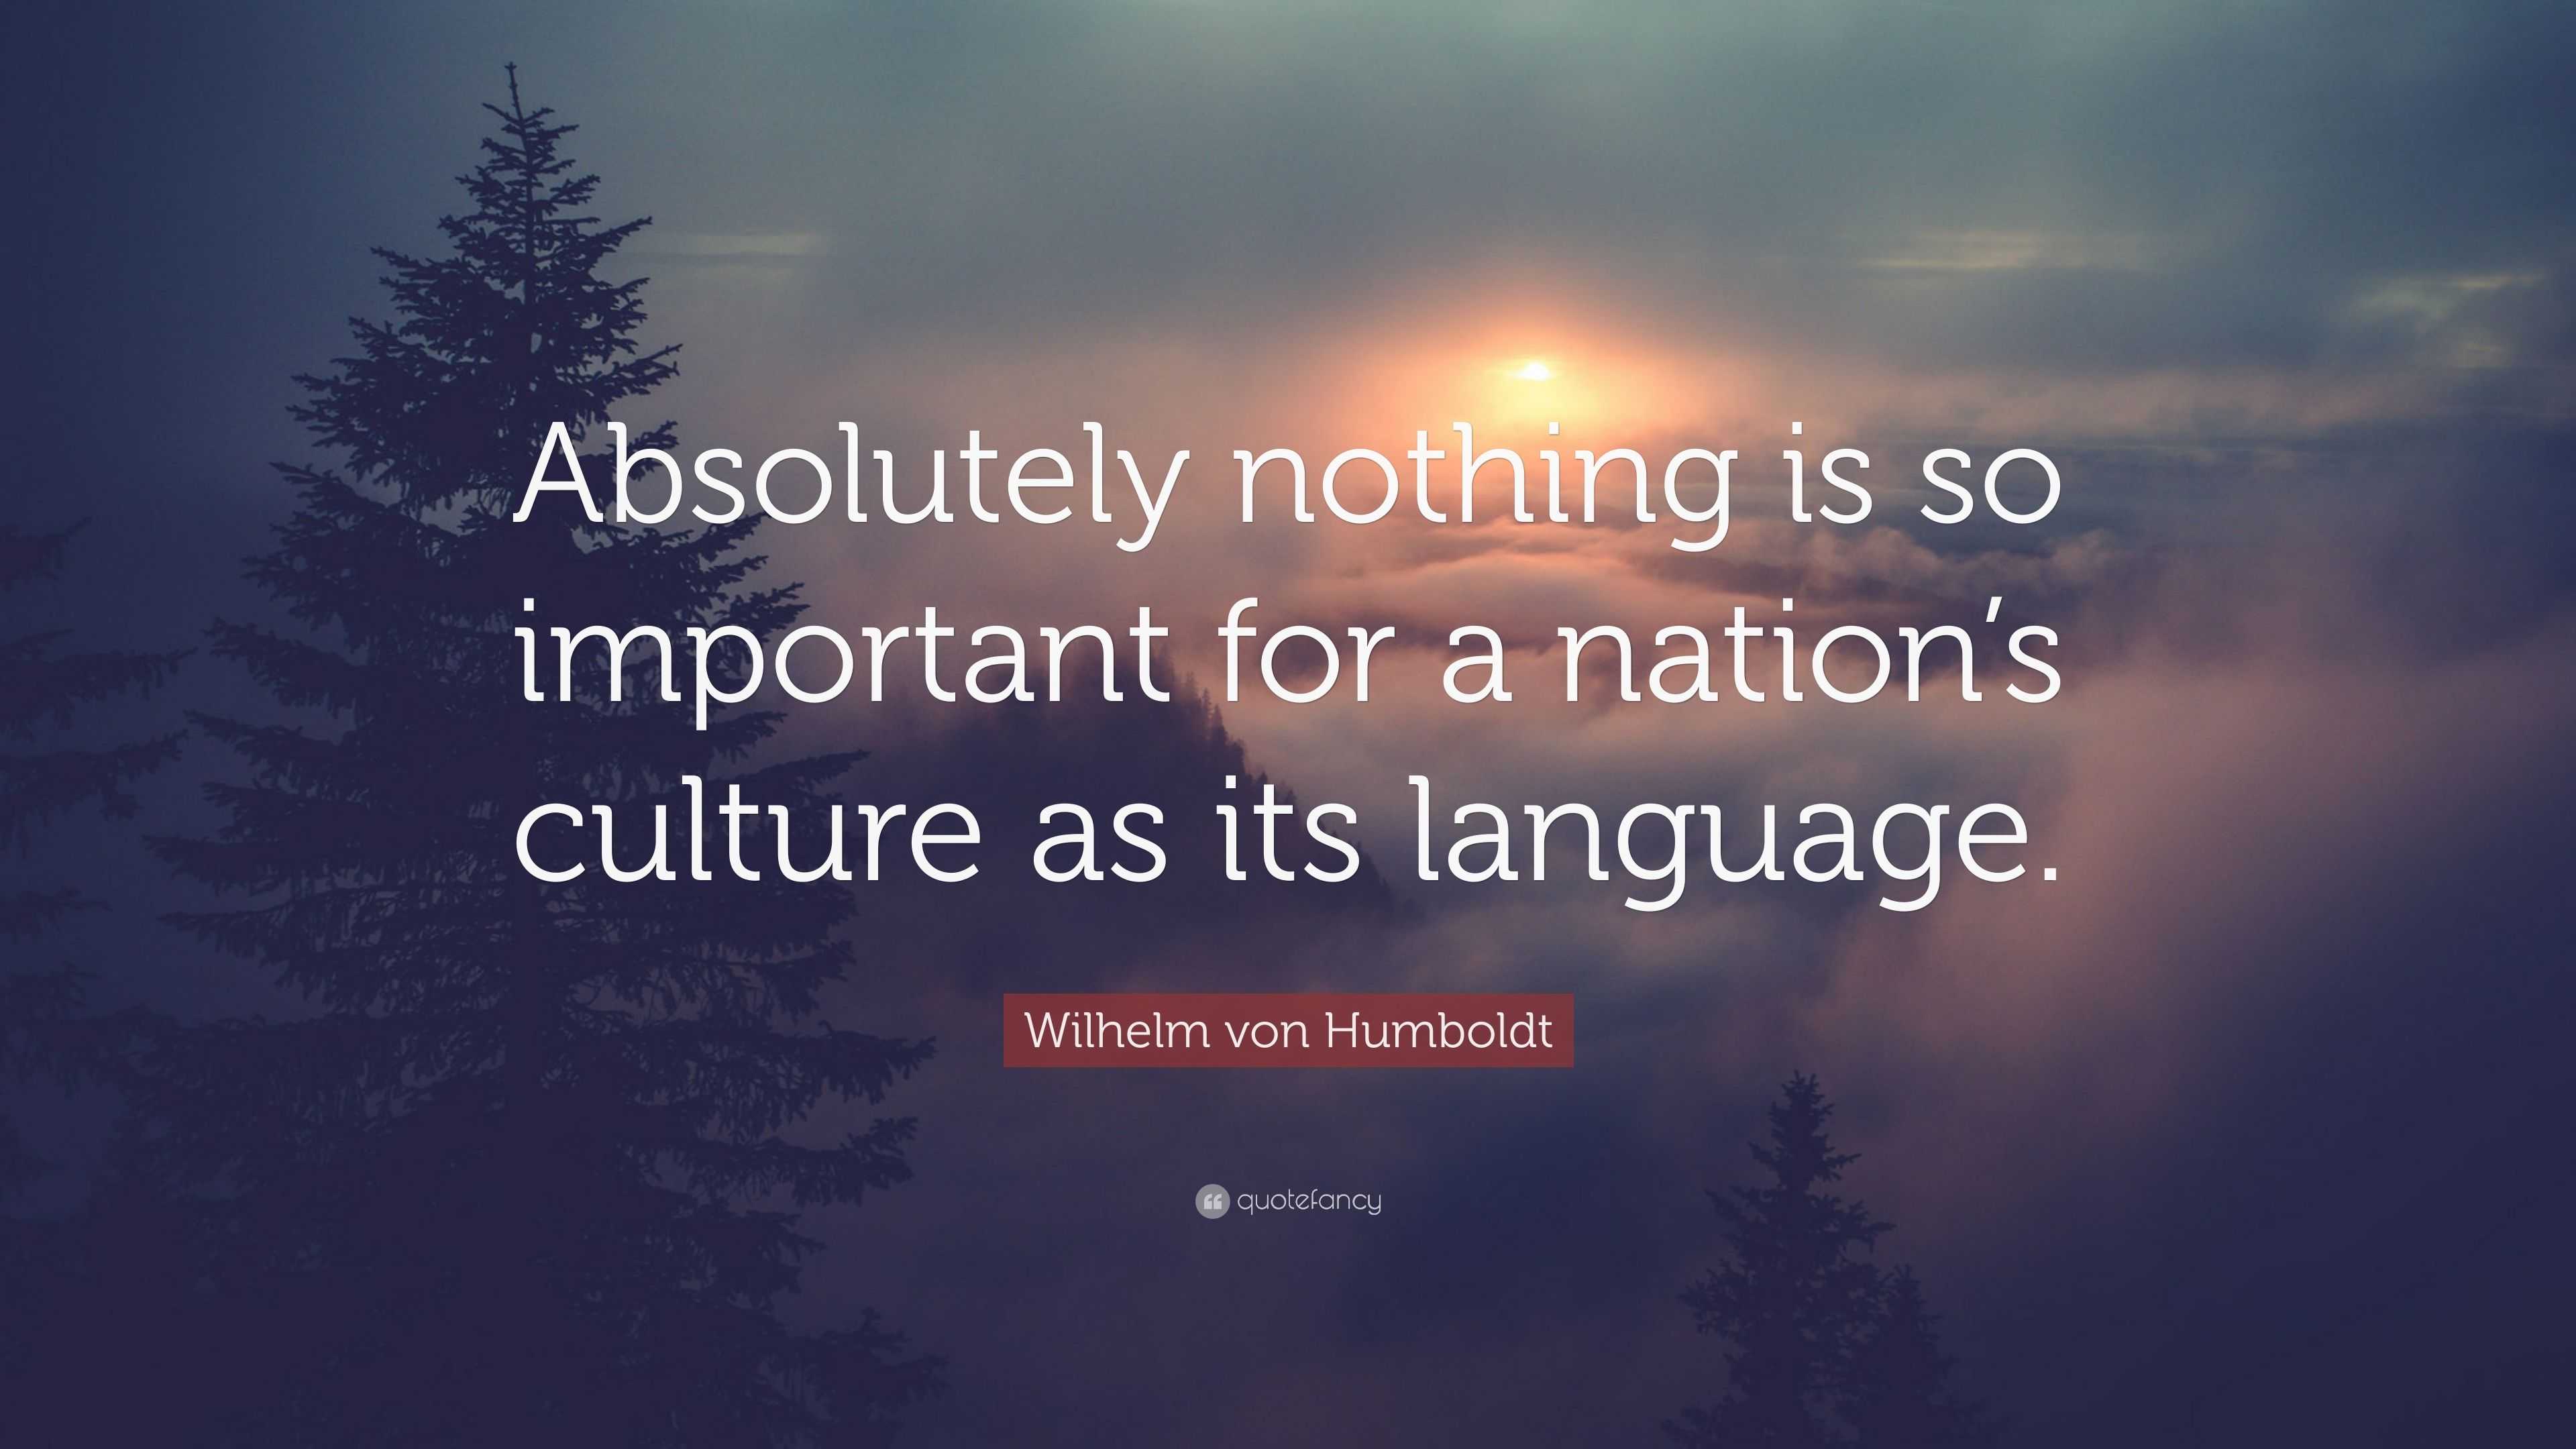 Wilhelm von Humboldt Quote: “Absolutely nothing is so important for a ...